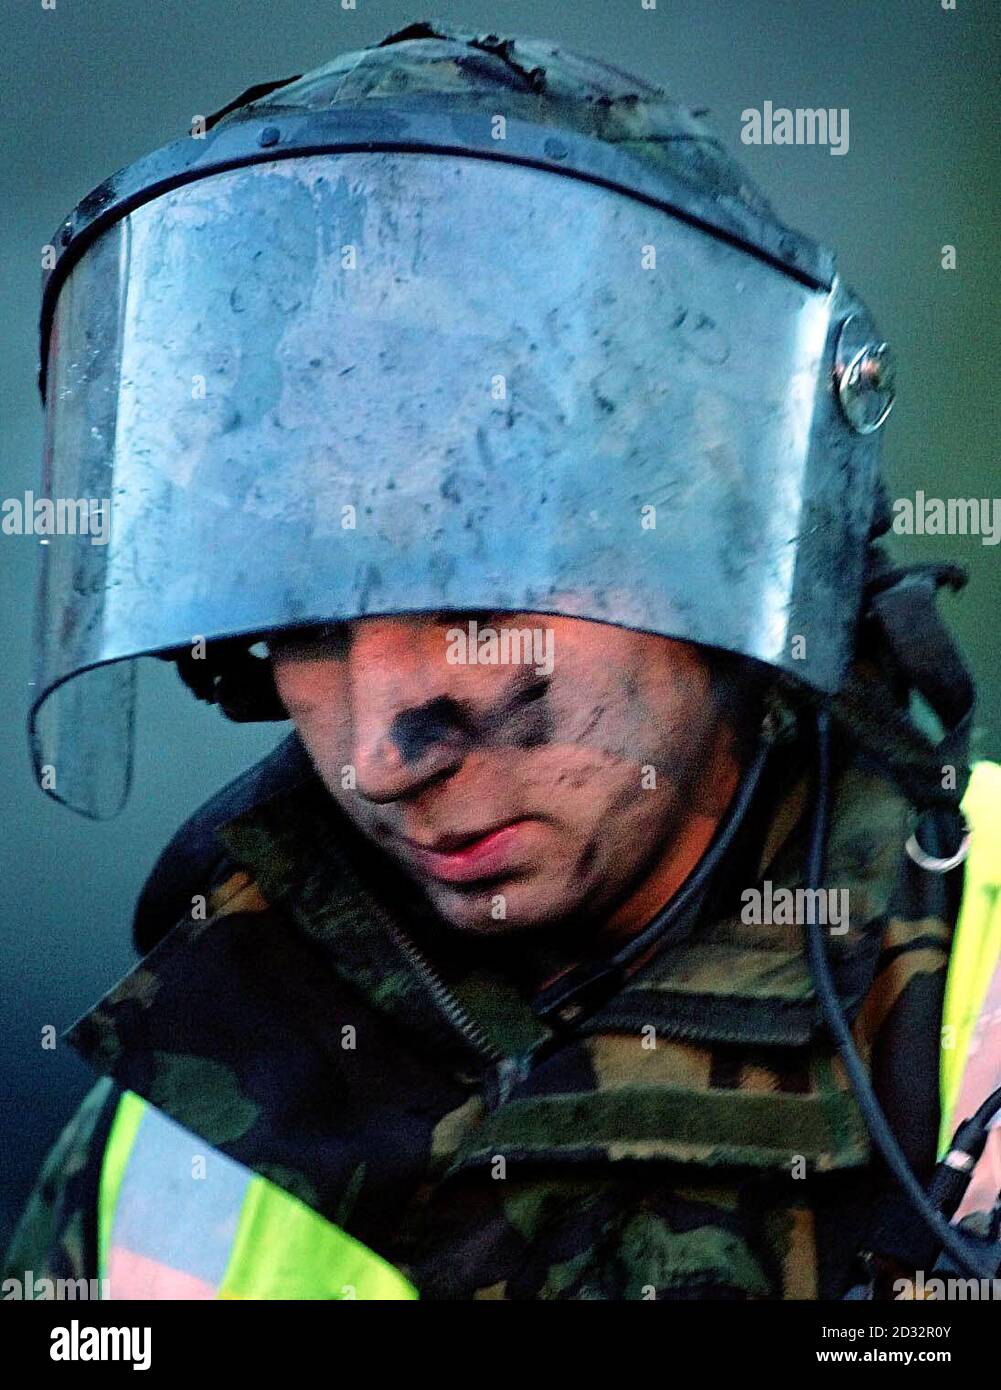 A tired looking Army Green Goddess crew member during damping down at the scene of the fire, early morning in Rochdale, Lancashire. More than 70 military firefighters were called out yesterday to tackle a blaze at a tyre warehouse. * Nine Green Goddesses, one Red Goddess and two Breathing Apparatus Rescue Tenders were sent to the scene. The national fire service are currently serving an eight day strike over pay disputes. 02/12/02 : A 15-page dossier prepared by the Government's emergencies committee, Cobra, praises the 19,000 troops who provided emergency cover during last weeks firefight Stock Photo